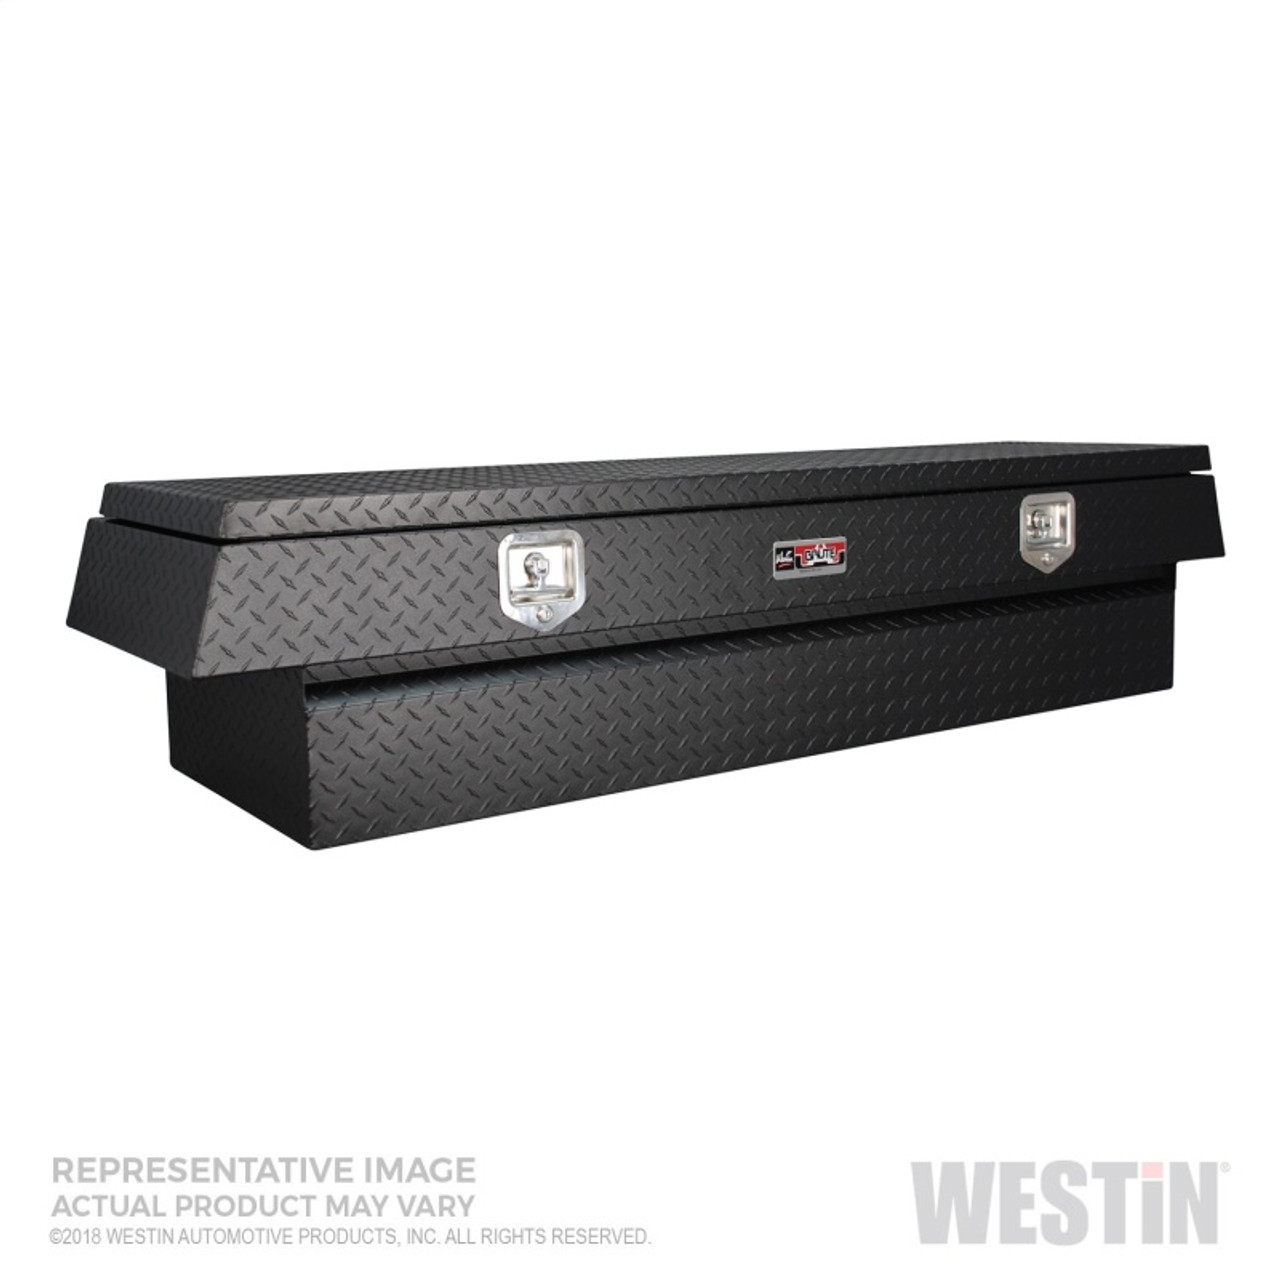 Westin/Brute 39in Commercial Class Trailer Tongue Box 45 x 15 x 19 - Tex. Blk - 80-RB4919-BT Photo - Primary